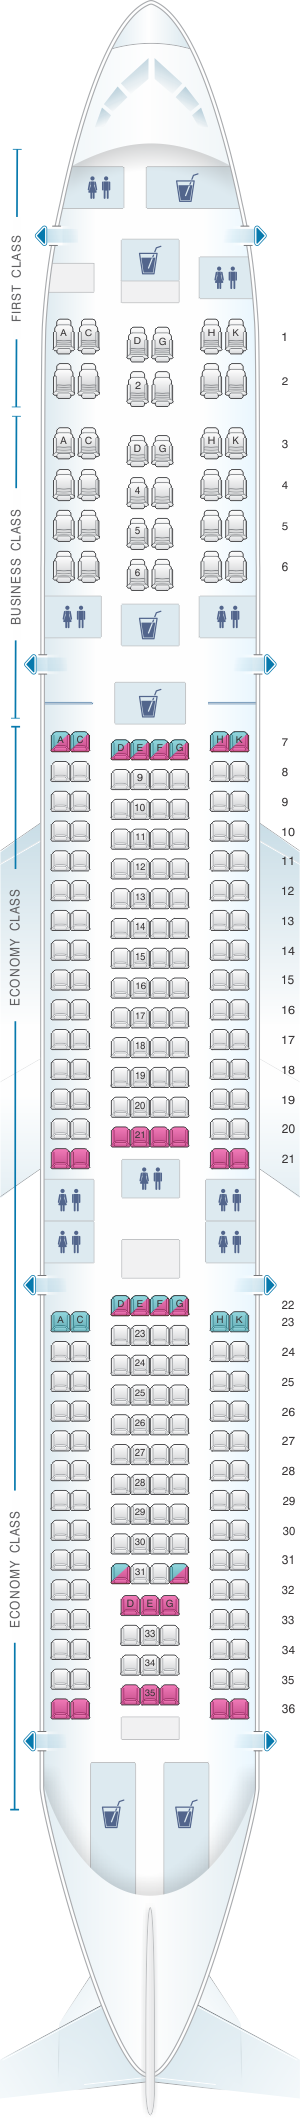 Seat map for Egyptair Airbus A340 212